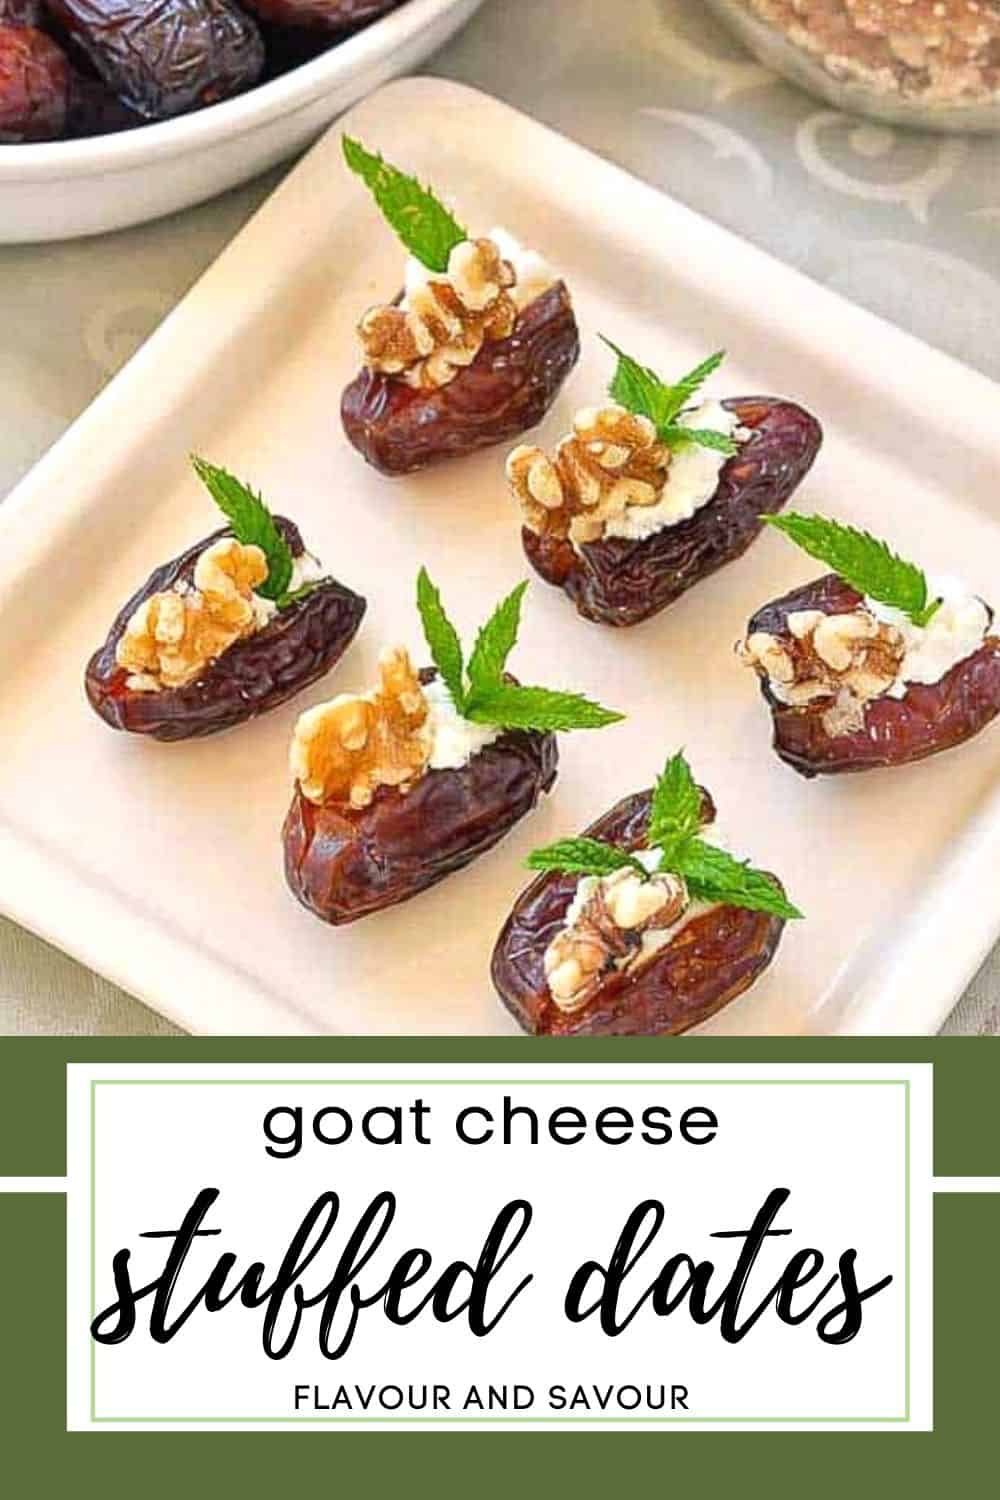 image and text for goat cheese stuffed dates